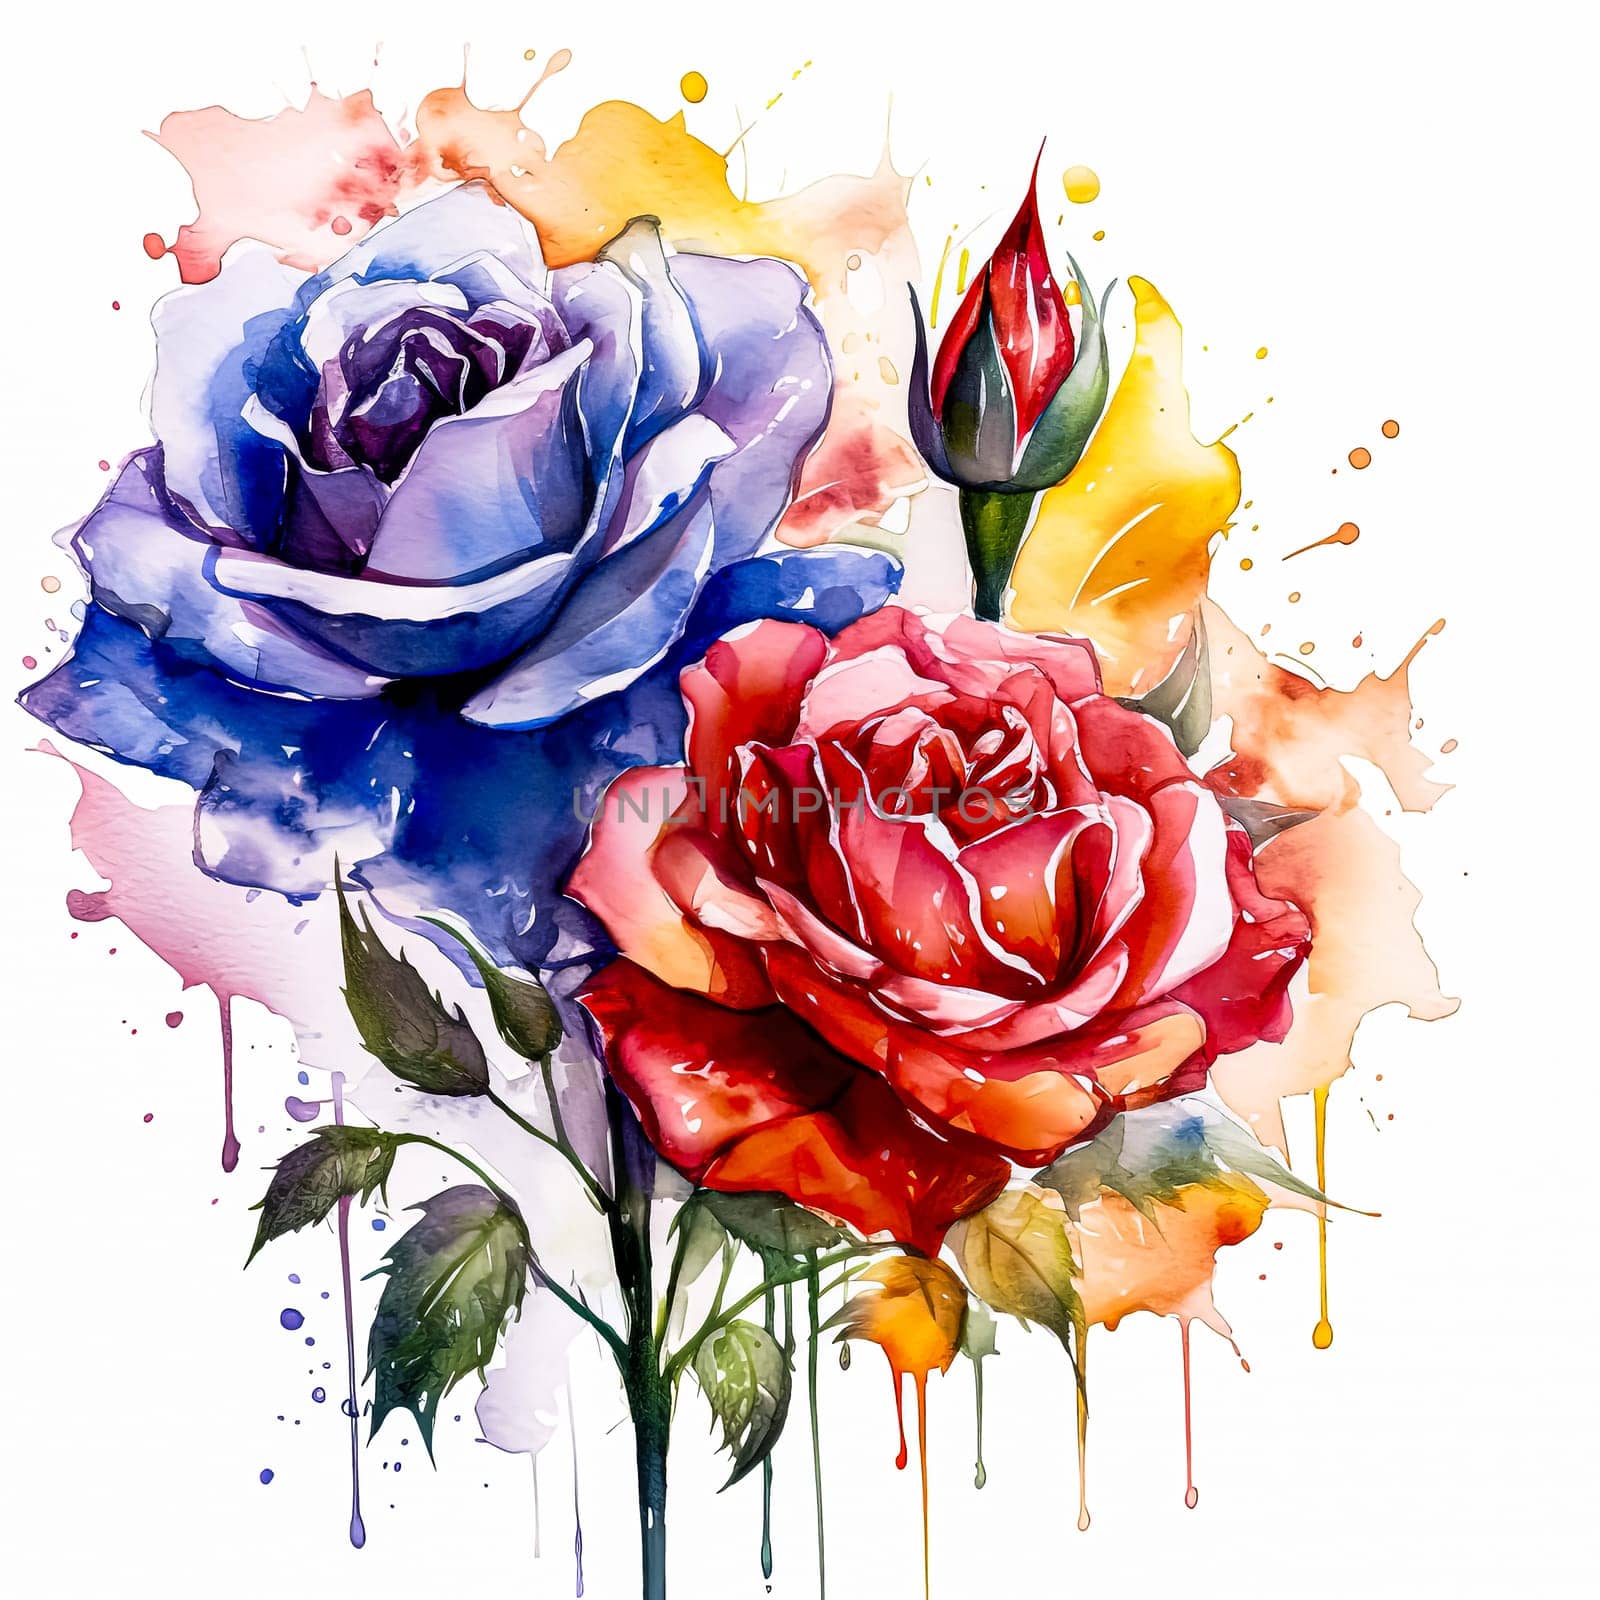 Hand drawn watercolor illustration featuring abstract botanical elements with splashes. Red rose bouquet on white background, ideal for invitations, postcards, posters.